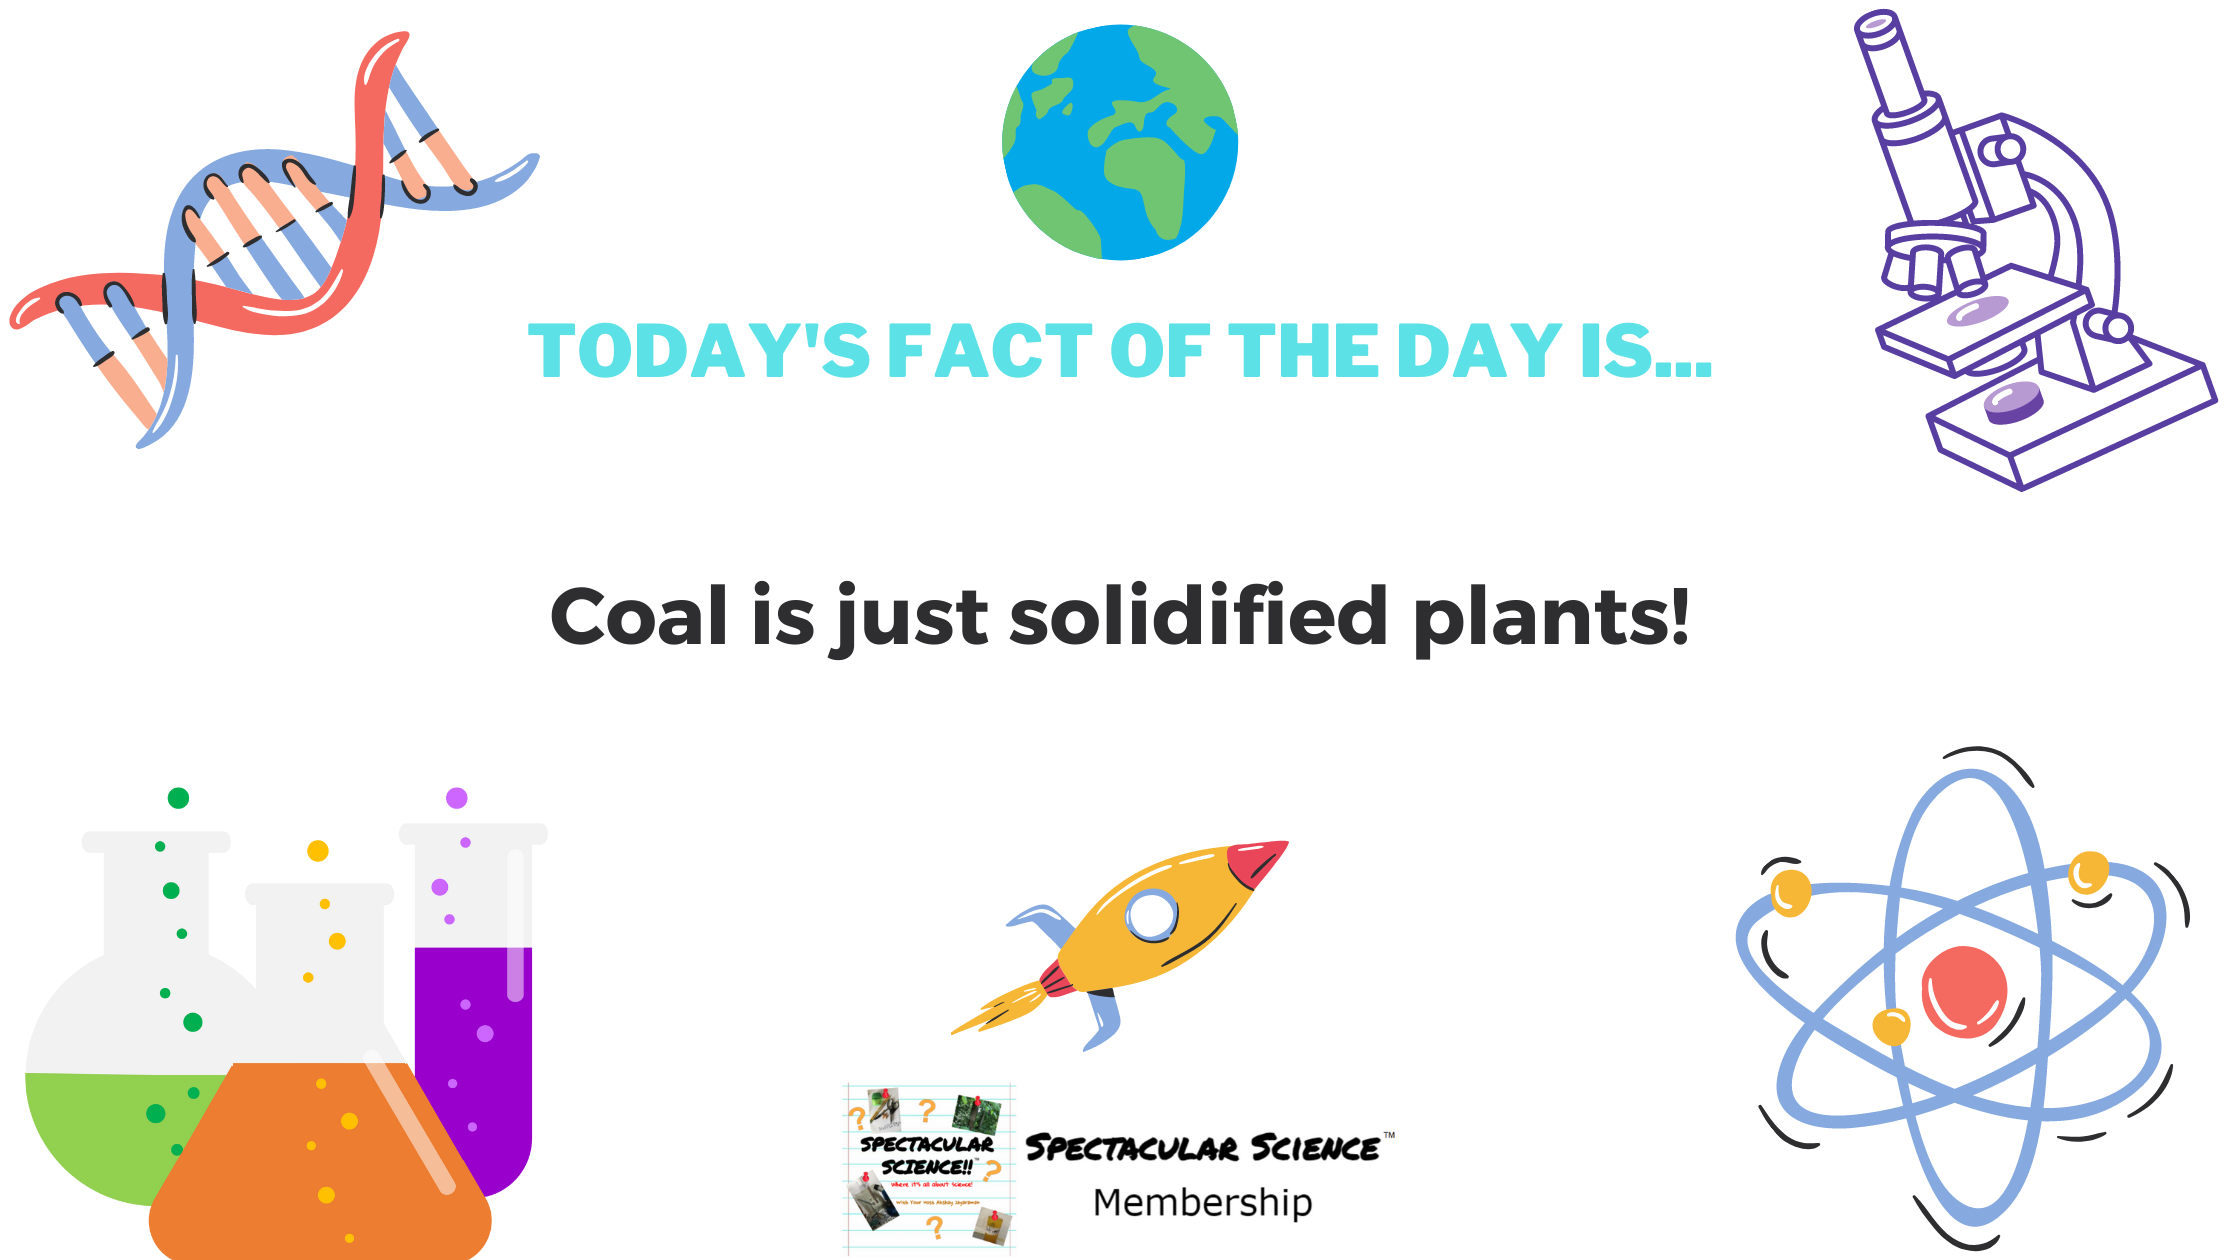 Fact of the Day Image May 24th